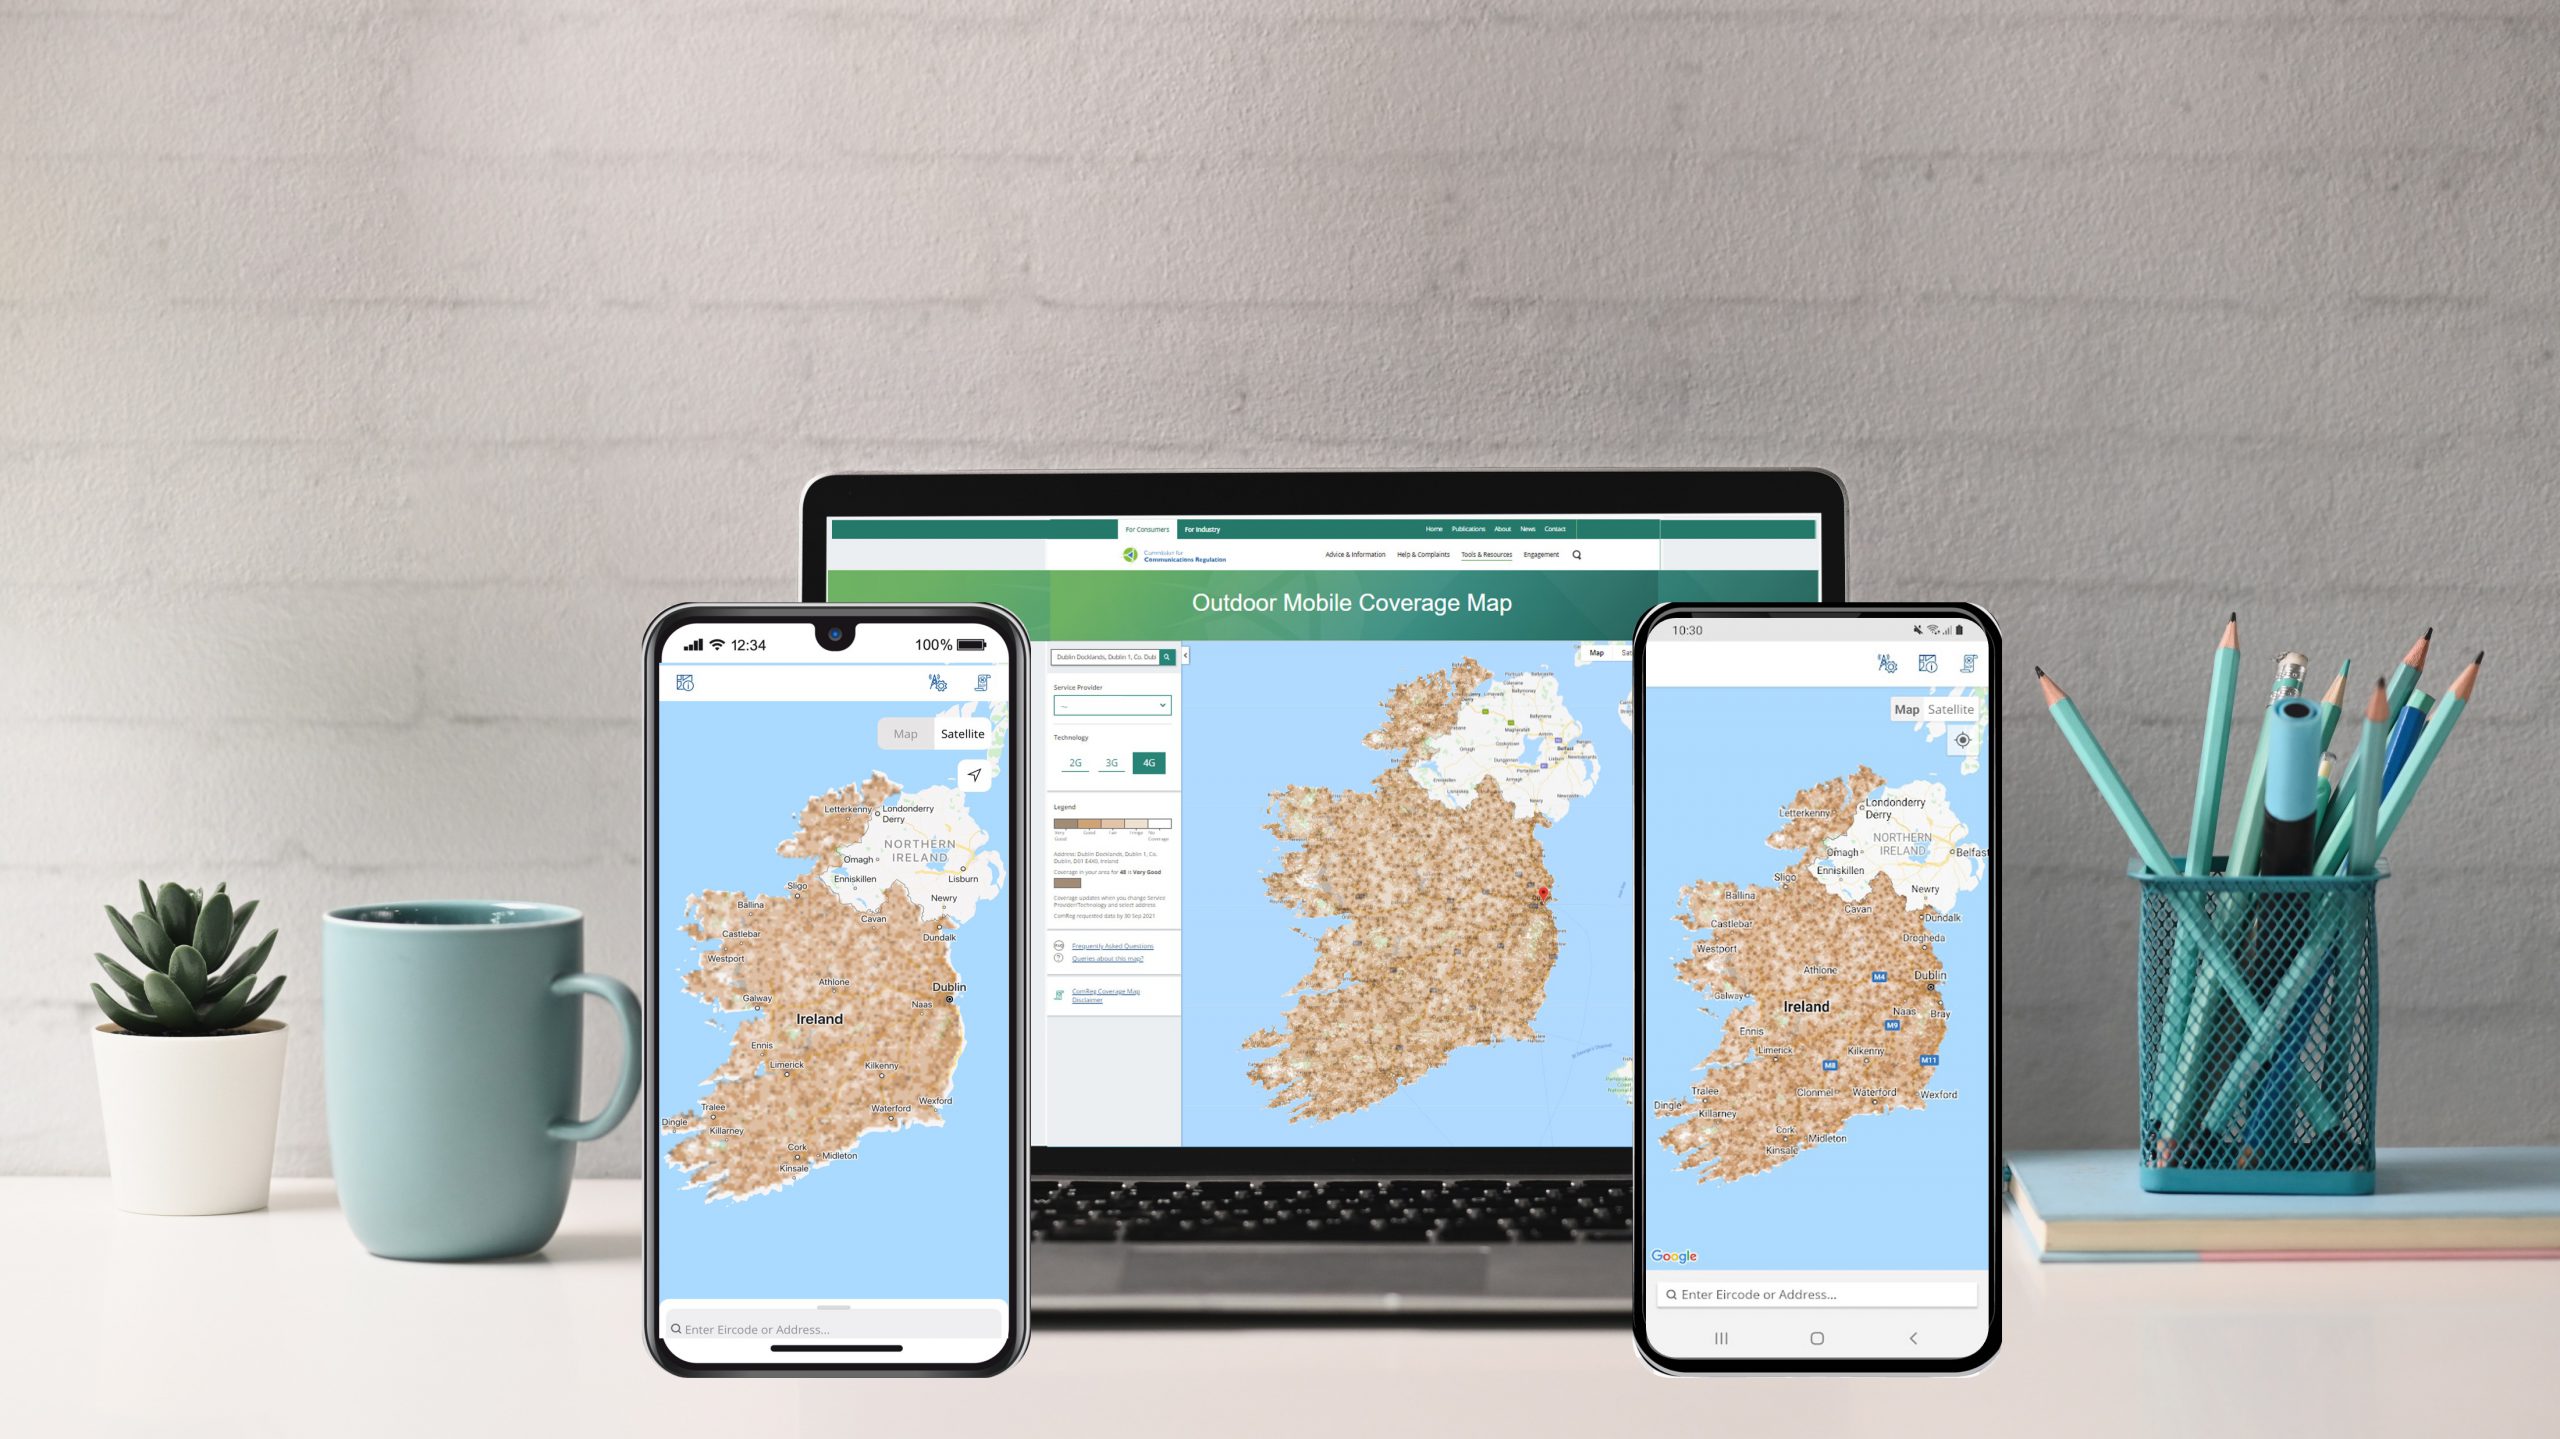 ComReg’s Outdoor Mobile Coverage Map and App